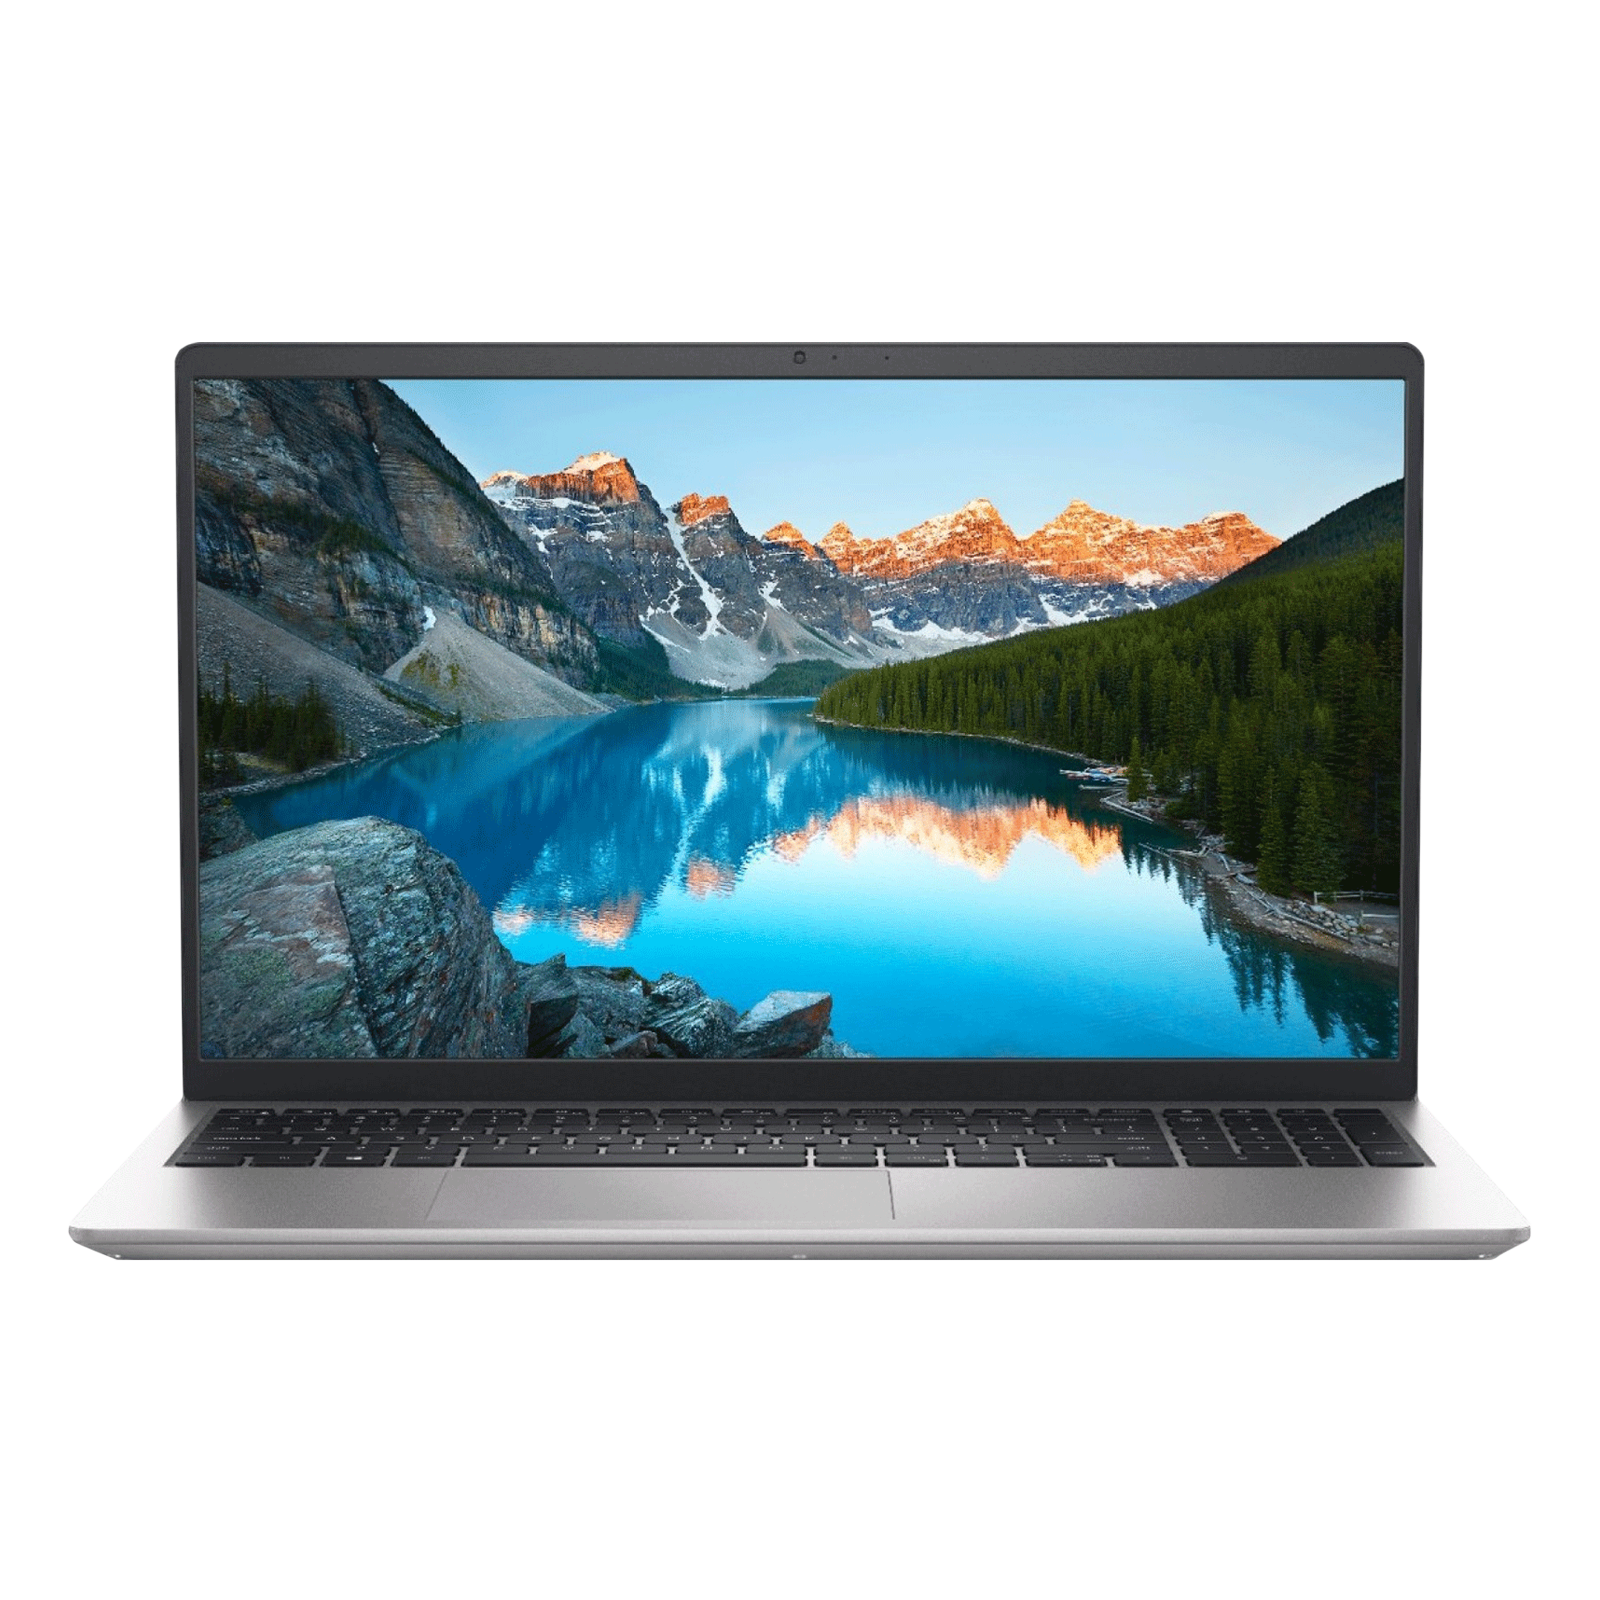 Dell Inspiron 3511 Intel Core i5 11th Gen (15.6 inch, 8GB, 1TB and 256GB, Windows 11, MS Office 2021, NVIDIA GeForce MX350 Graphics, FHD IPS Display, Platinum Silver, D560674WIN9S)_1